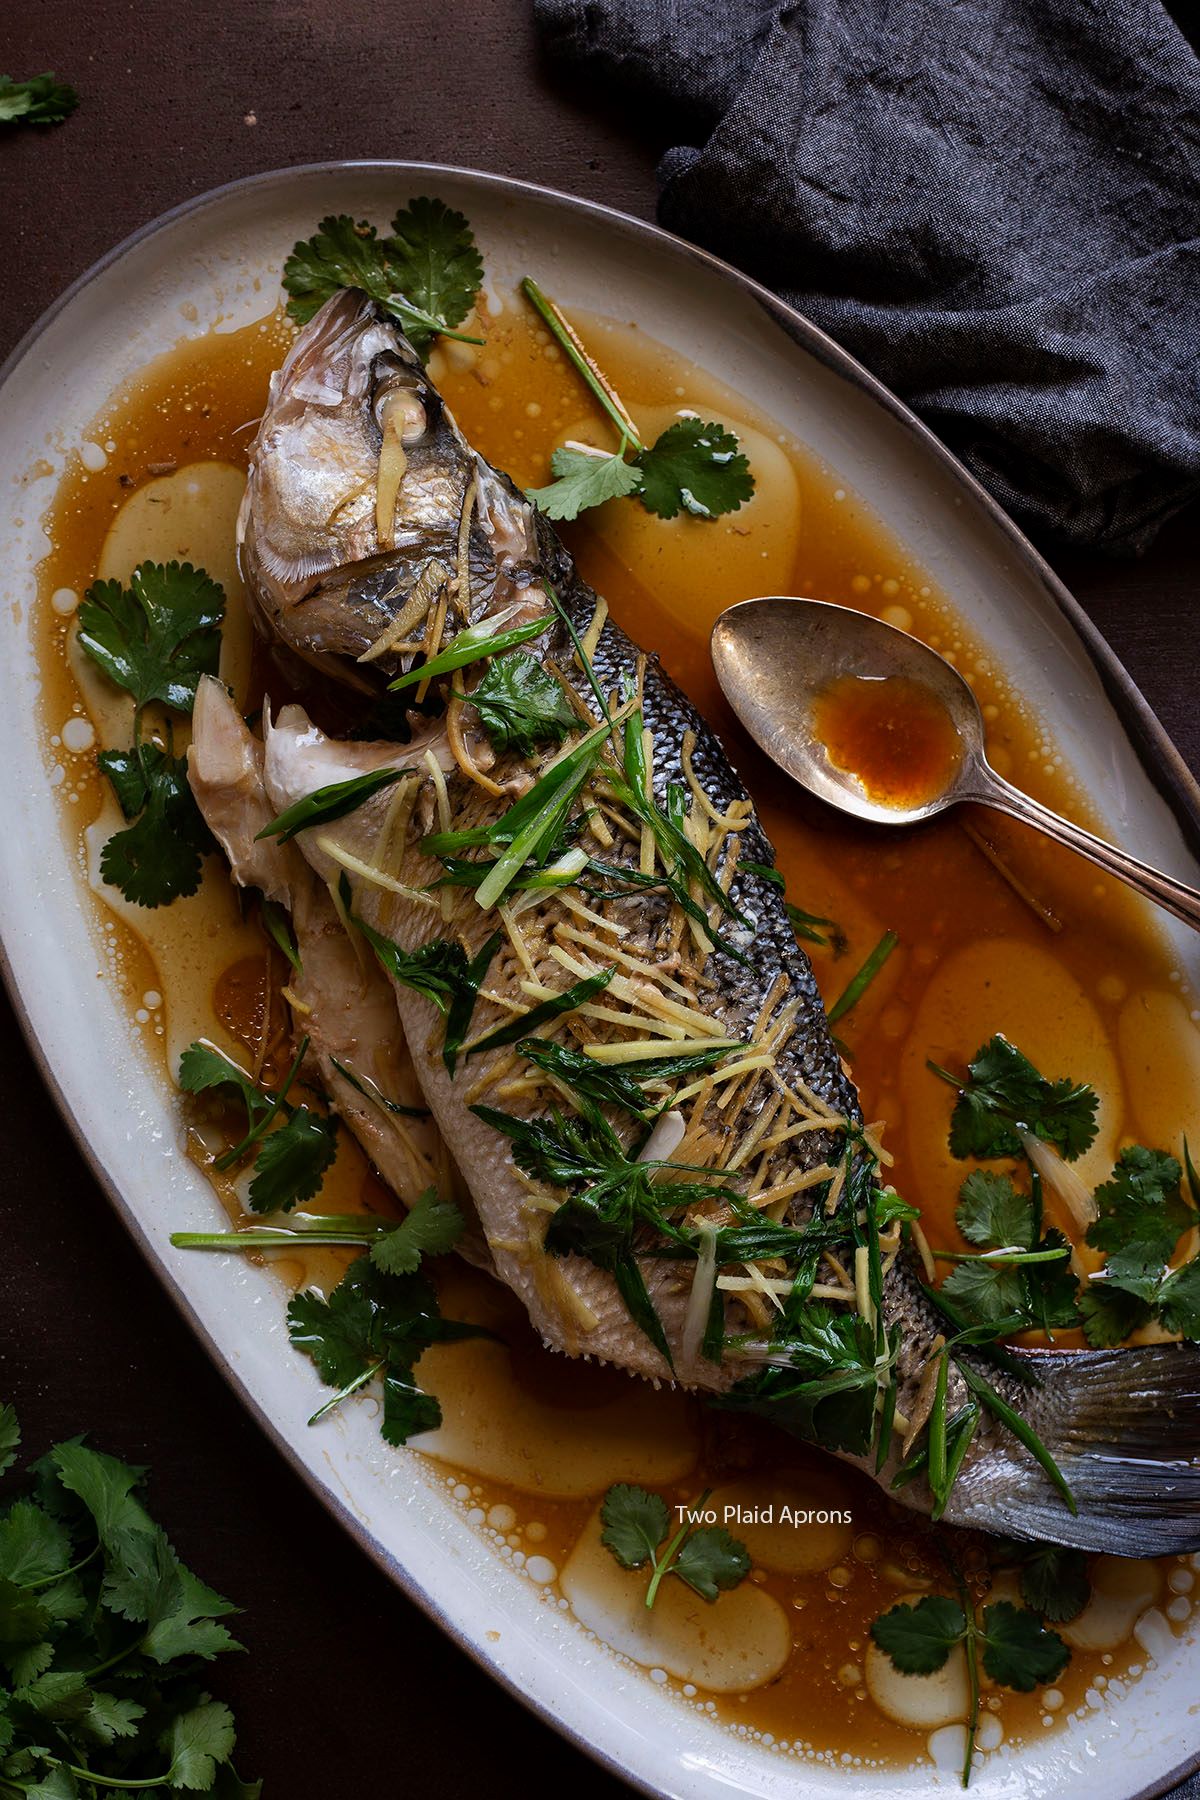 Top view of a whole steamed fish with ginger and scallion.